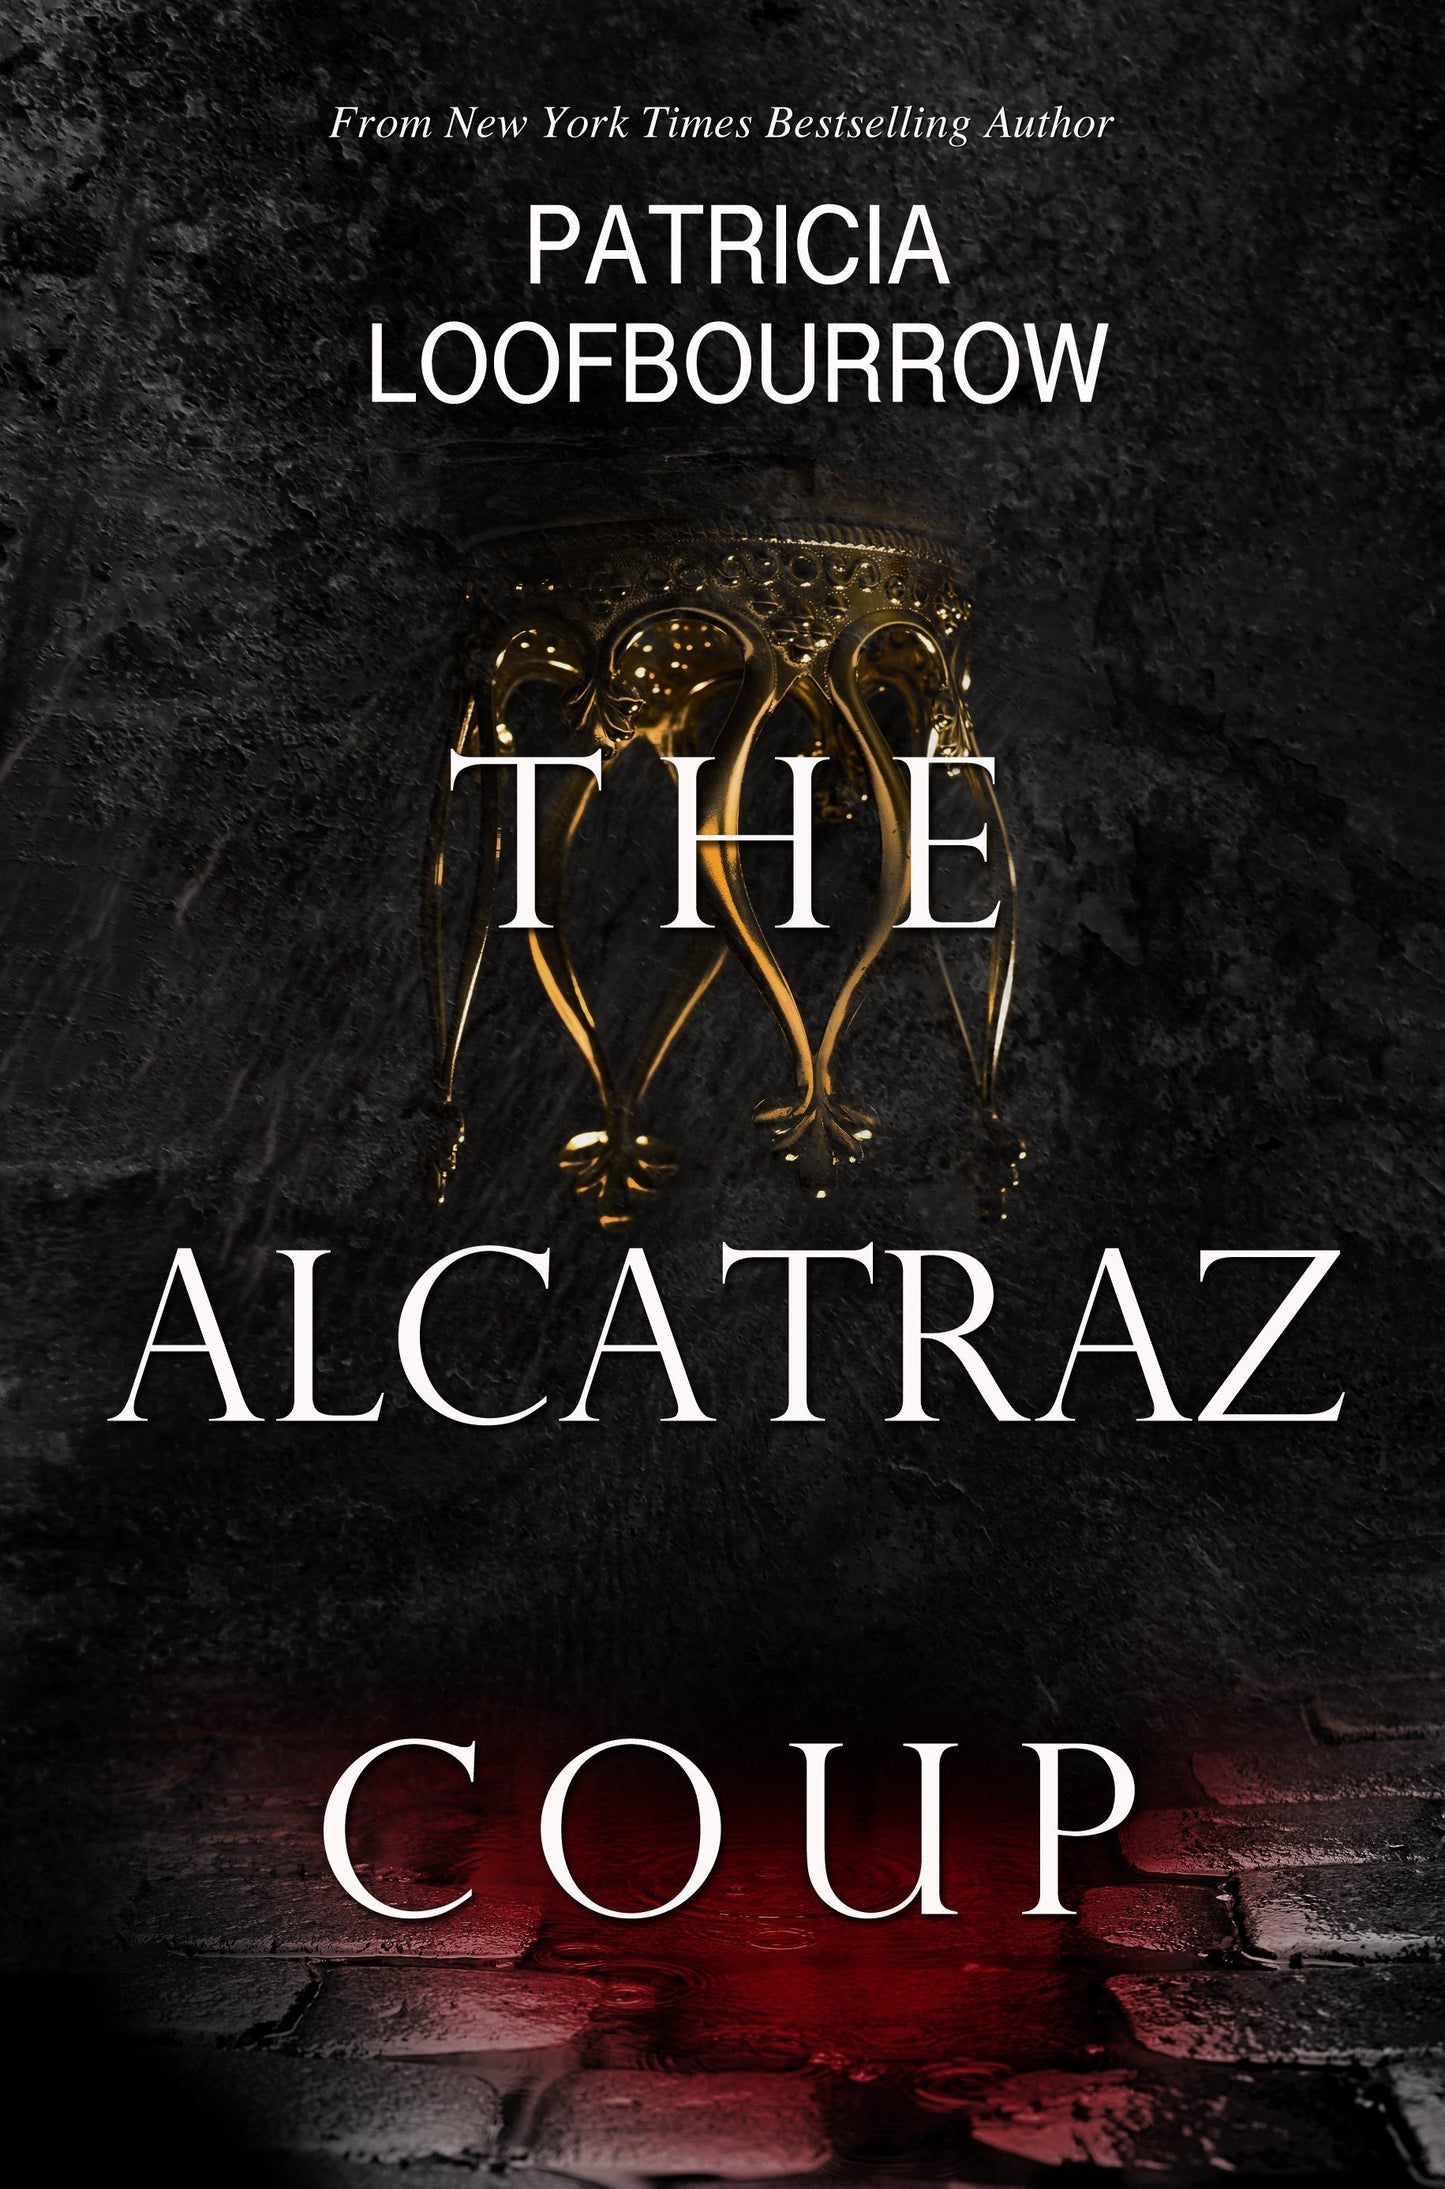 The Alcatraz Coup [signed paperback] - PatriciaLoofbourrow